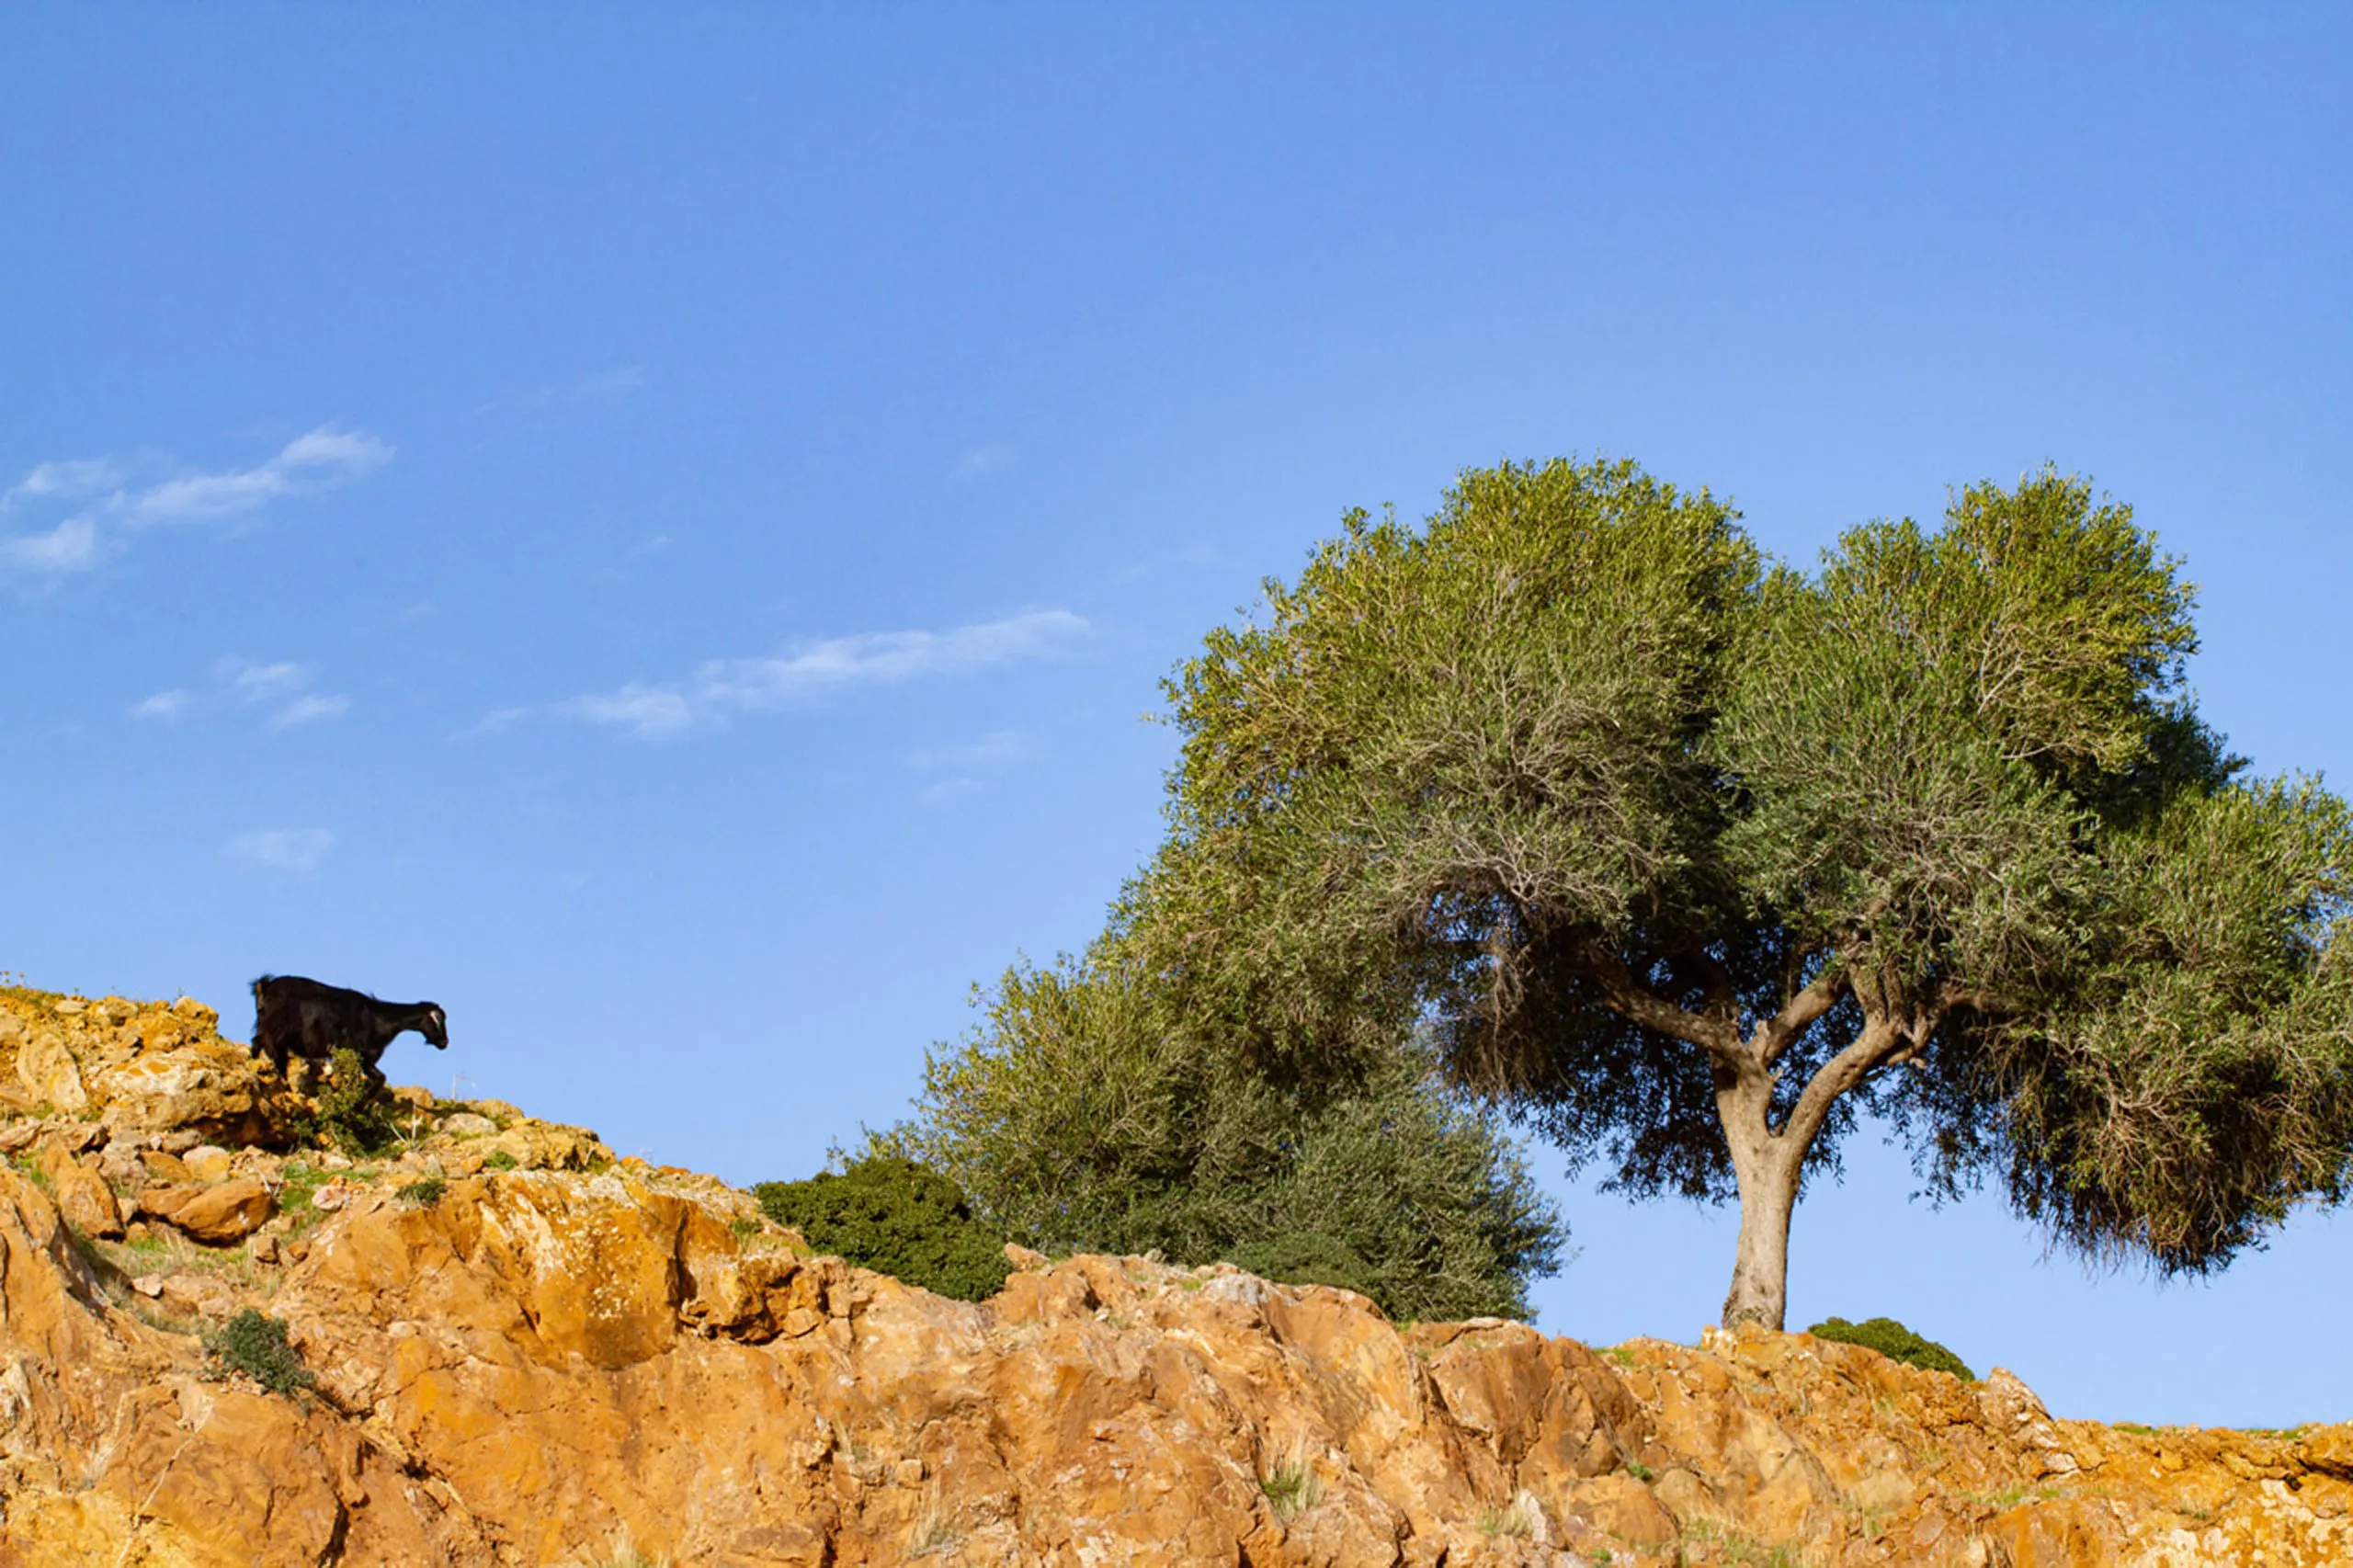 A goat is seen atop a cliff in the Ichkeul National Park, Tunisia.